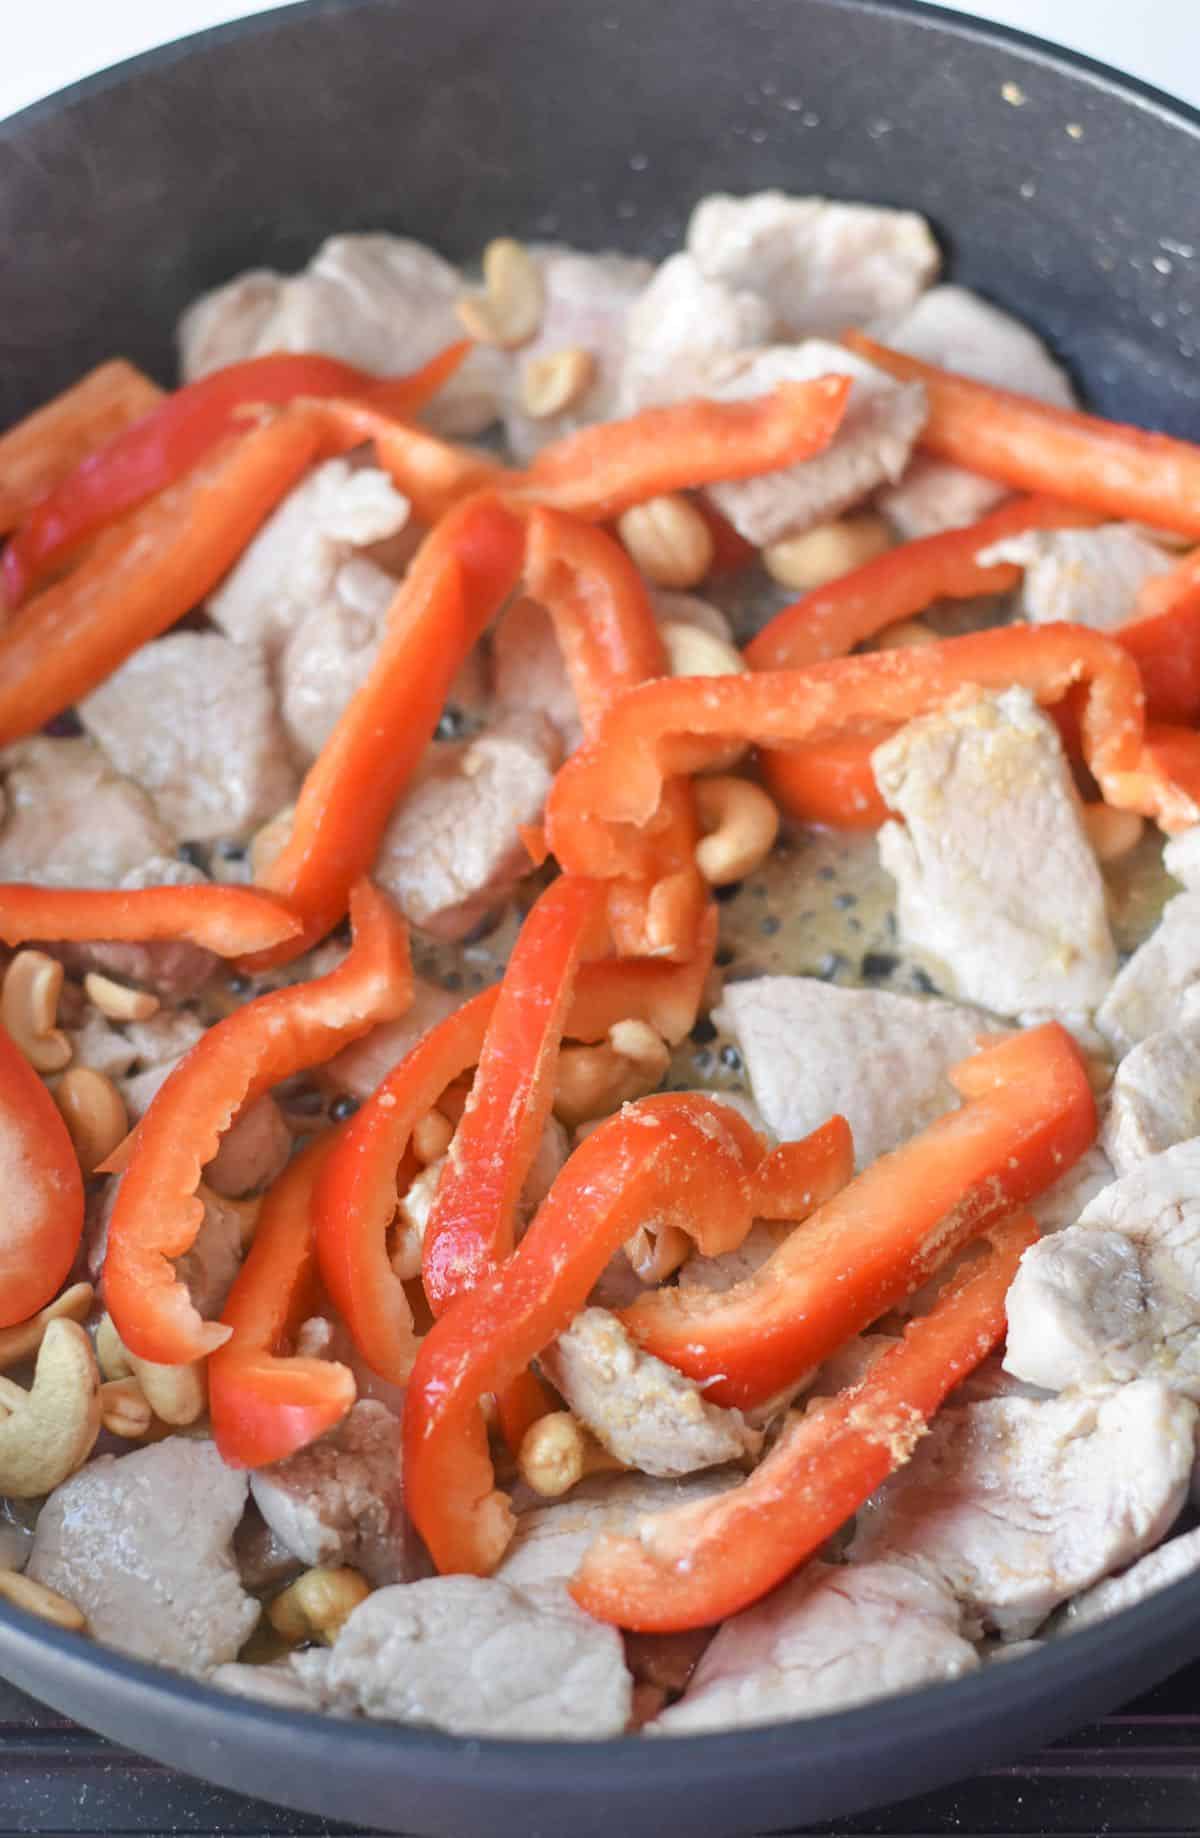 Pork tenderloin in a skillet with sliced red bell peppers.